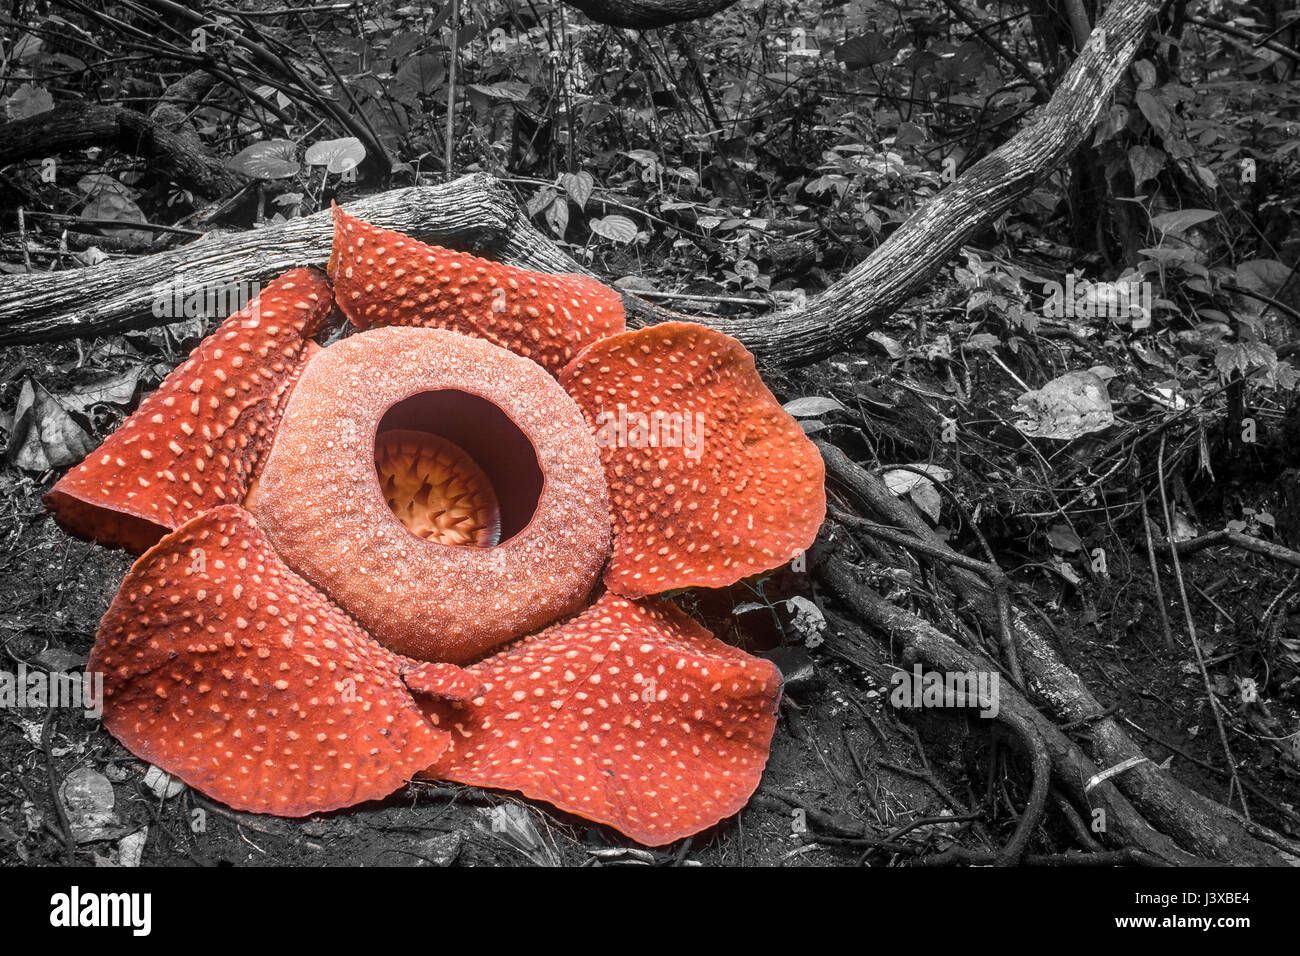 A critically endangered Rafflesia arnoldii in full bloom, the world's largest flower.  The smell of the flower is suggestive of rotting meat, giving i Stock Photo